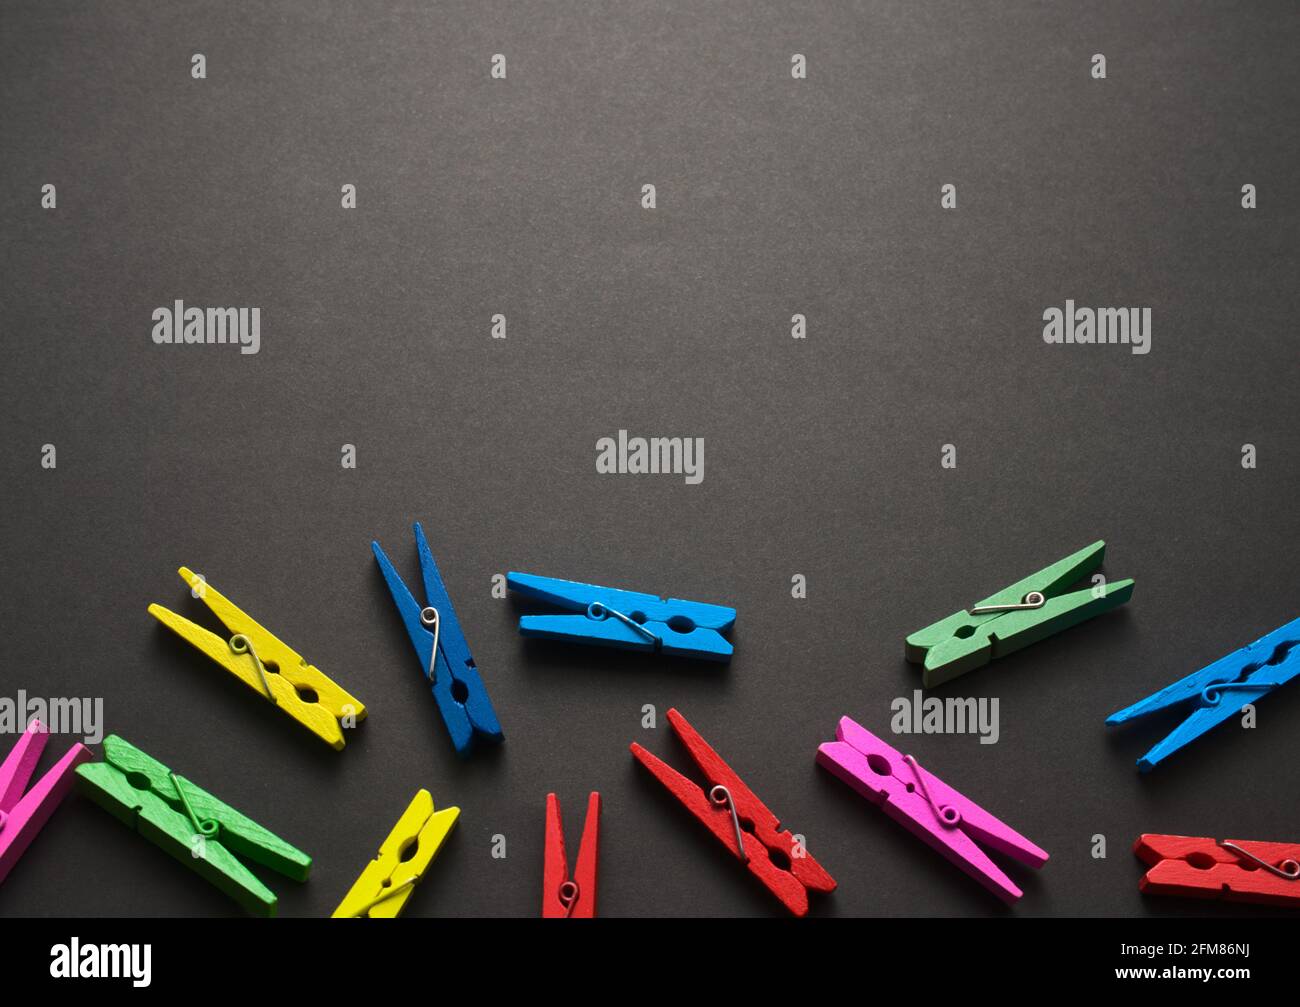 Mini colorful wooden craft pegs flat lay on black dark grunge texture pattern abstract background. Free space for your design. Top view, no people. Stock Photo